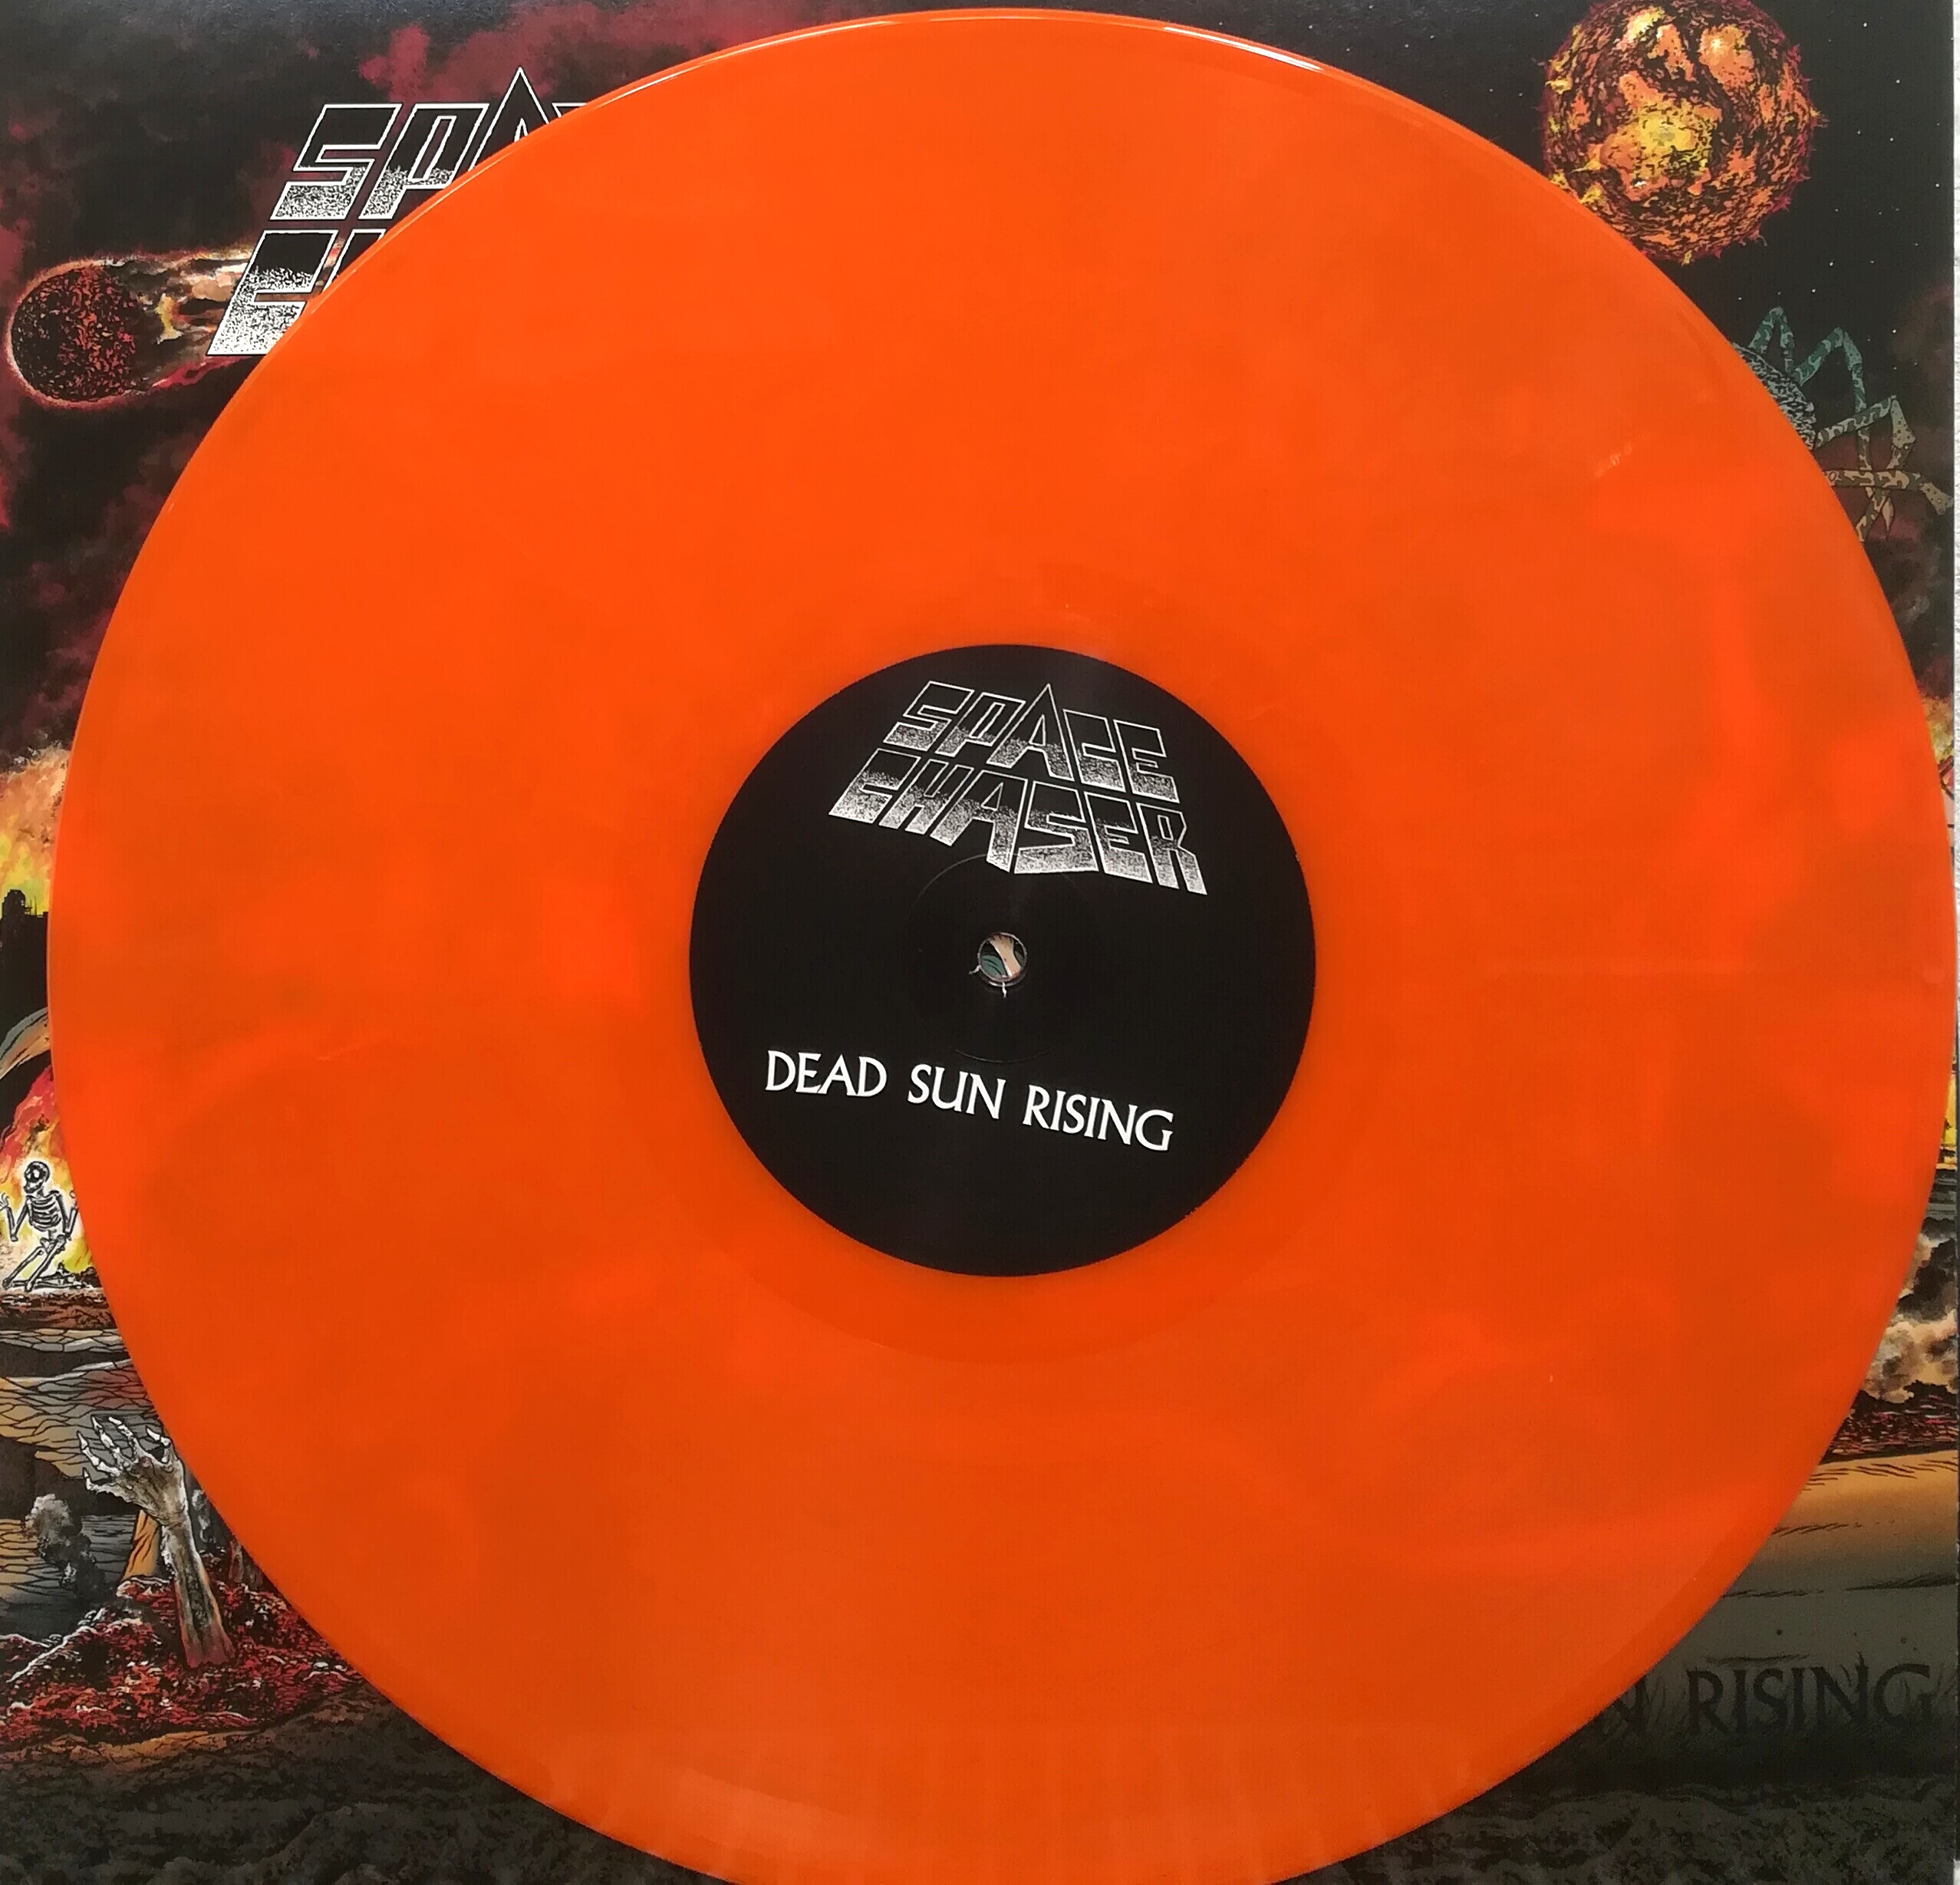 Space Chaser - Dead Sun Rising col.LP/CD Pressing Info: 1st press: 150x blood red, 600x black (Sold Out) 2nd press: 500x clear brown marbled (Sold Out) 3rd press: 150x solid orange marbled & 150x transparent yellow vinyl comes with downloadcode, CD version in jewelcase